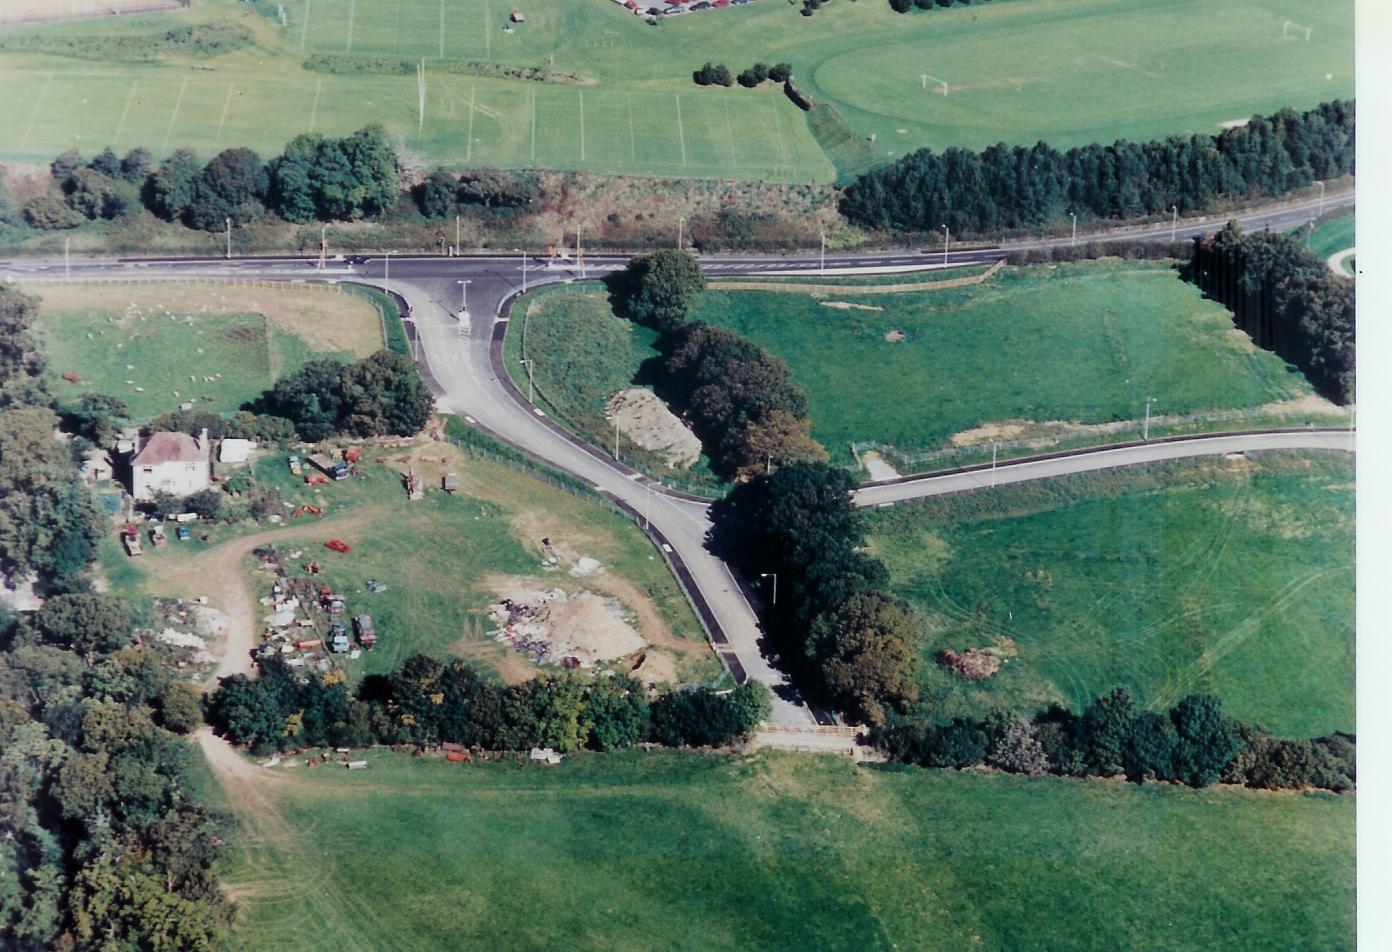 Aerial view of the Derriford site before building began